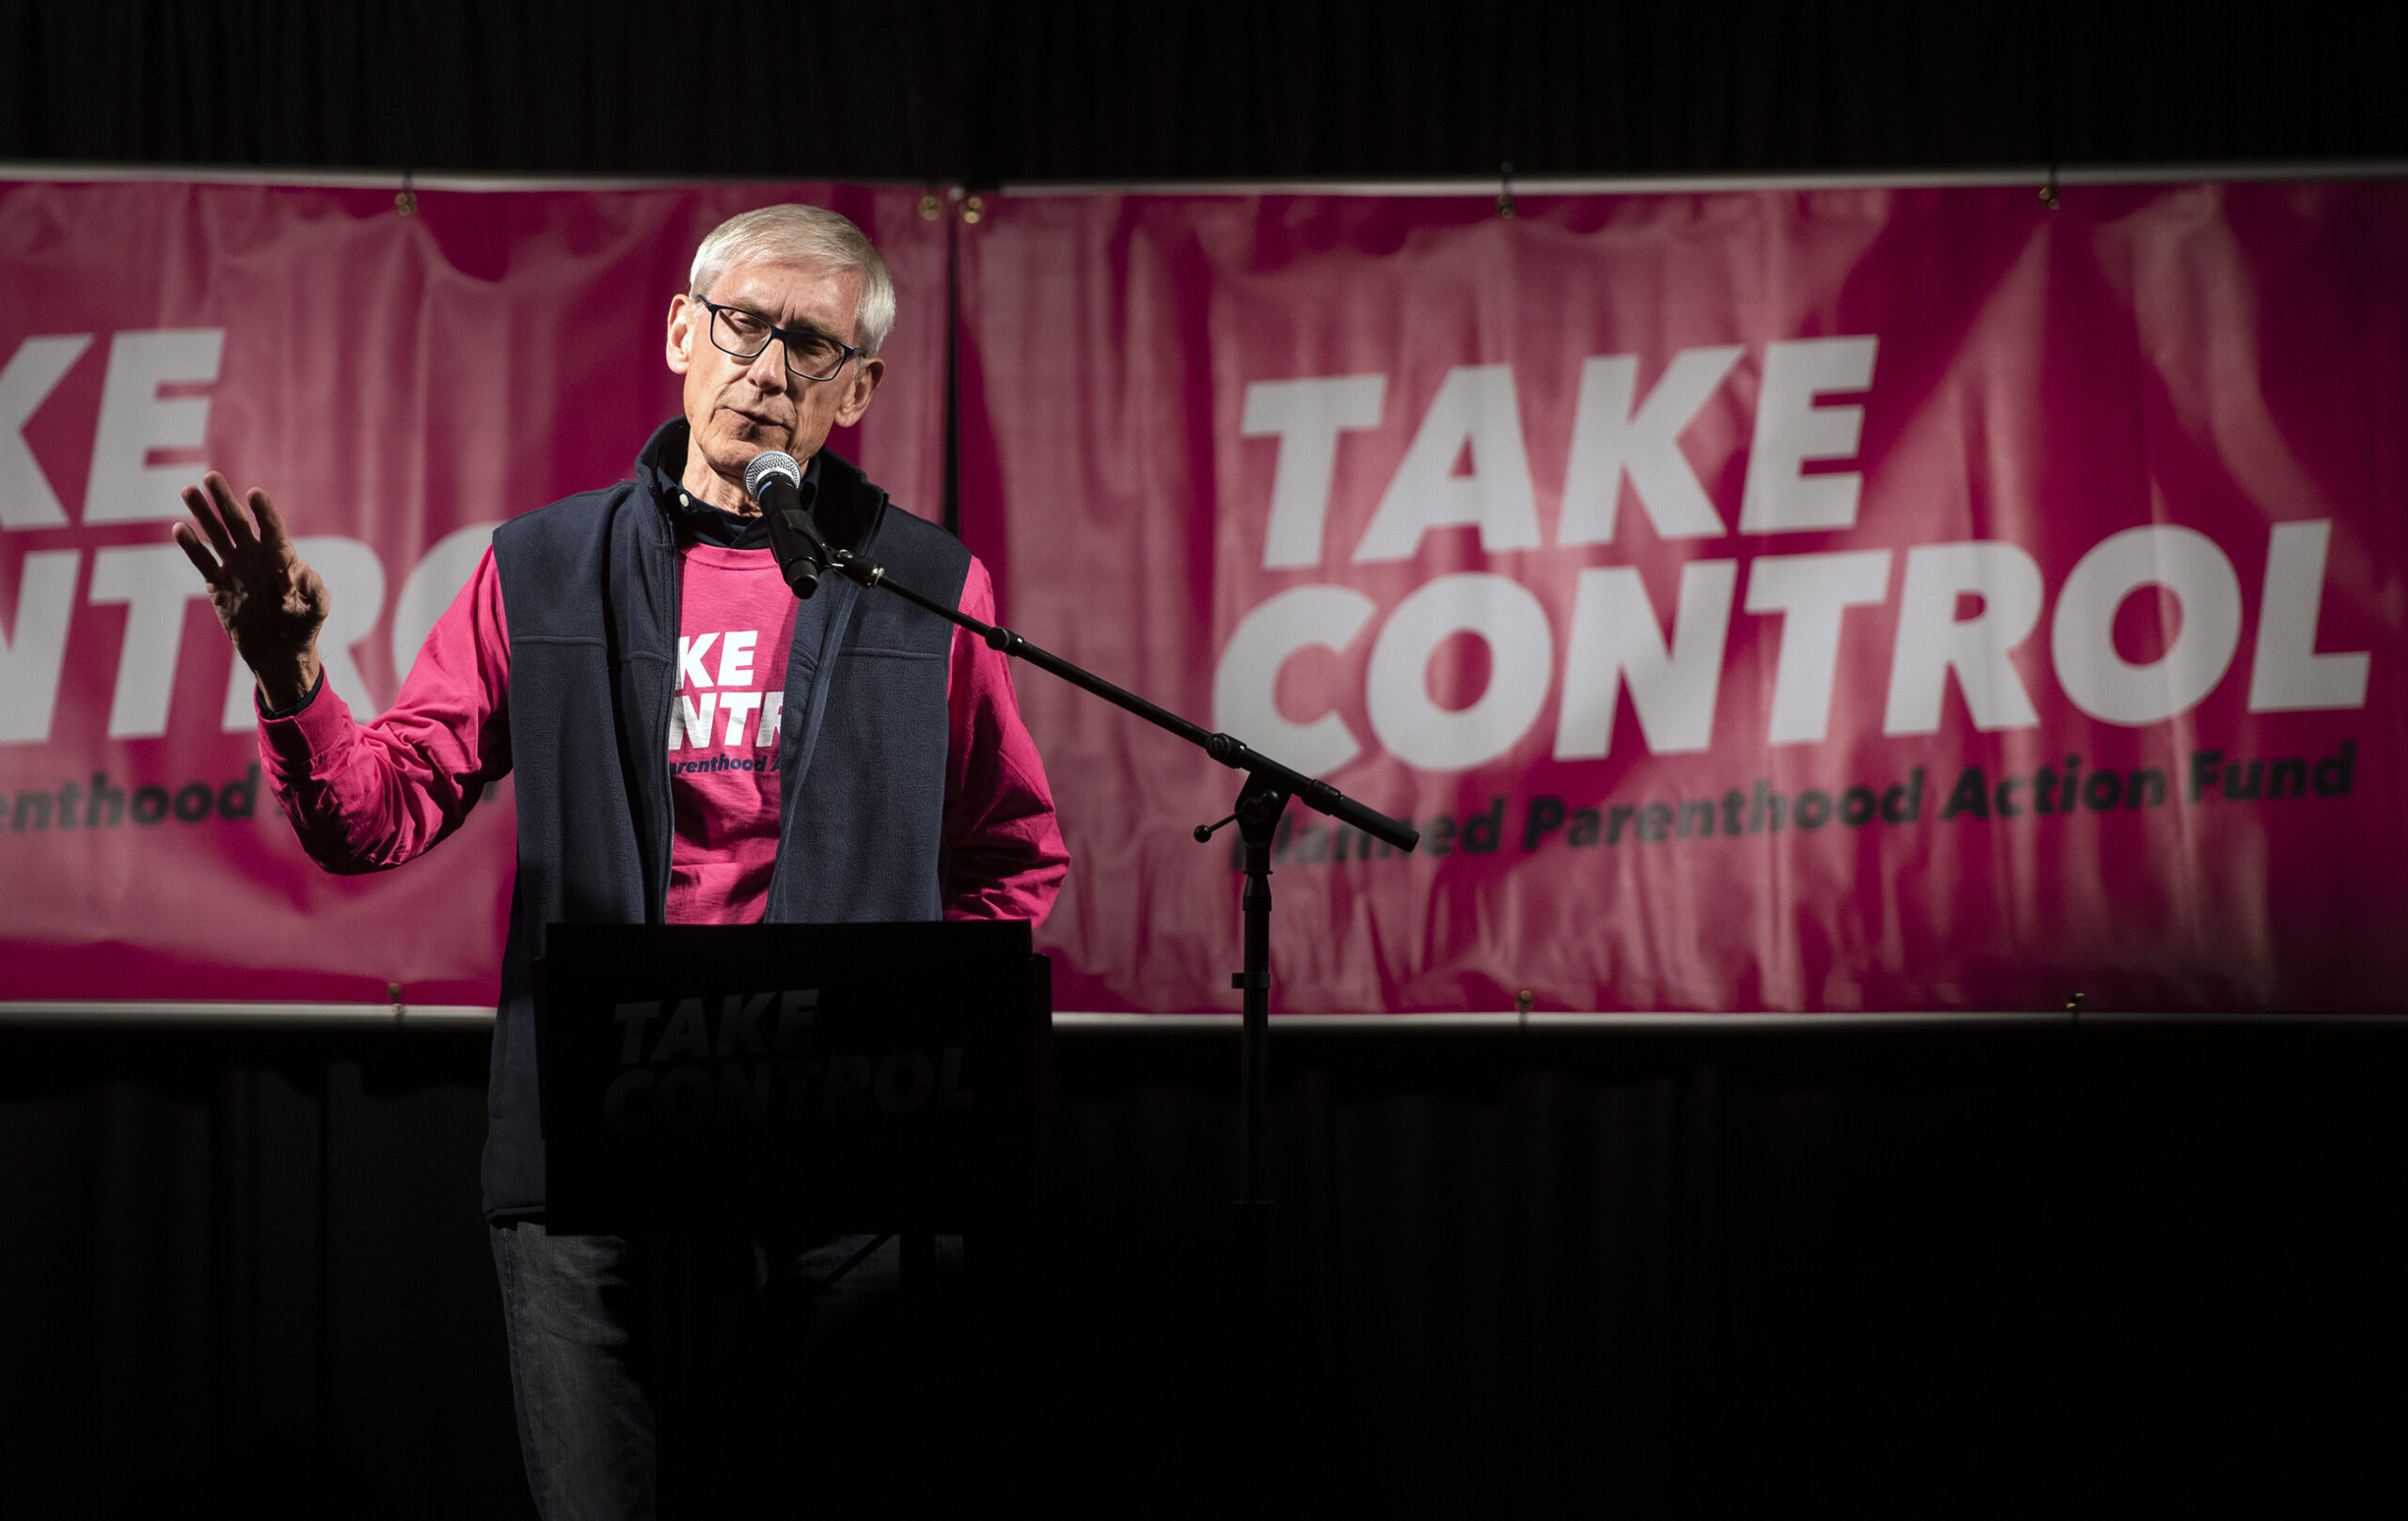 Gov. Tony Evers speaks on stage in front of pink Planned Parenthood signs that say 